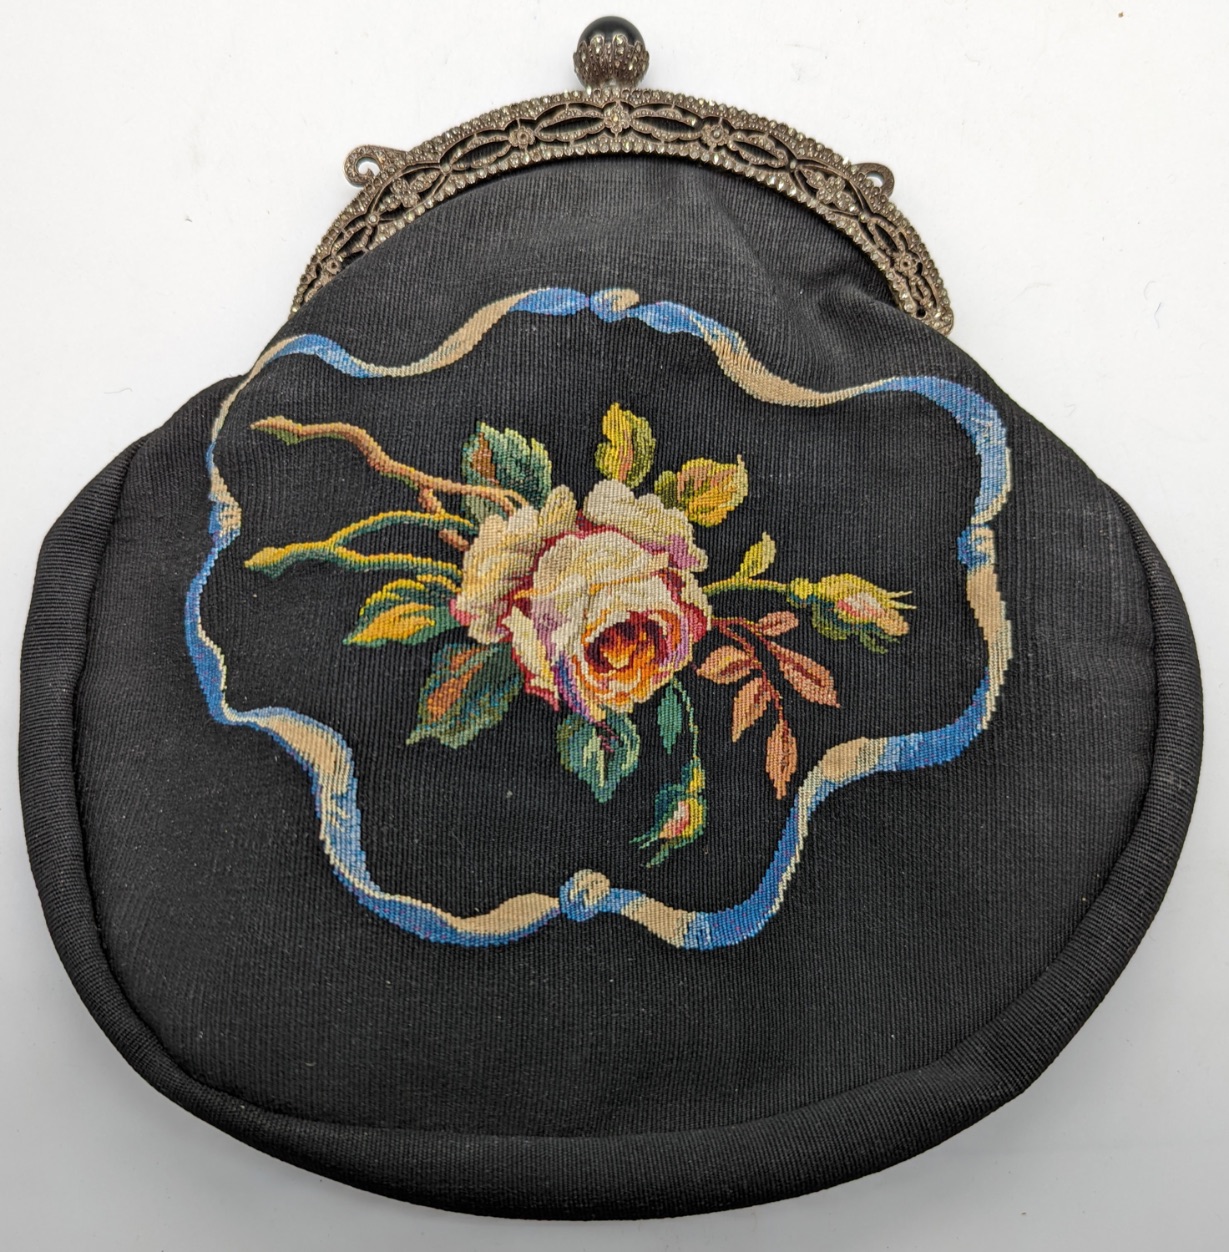 An 18th century French Aubusson handmade tapestry handbag with silver mount - Image 2 of 2